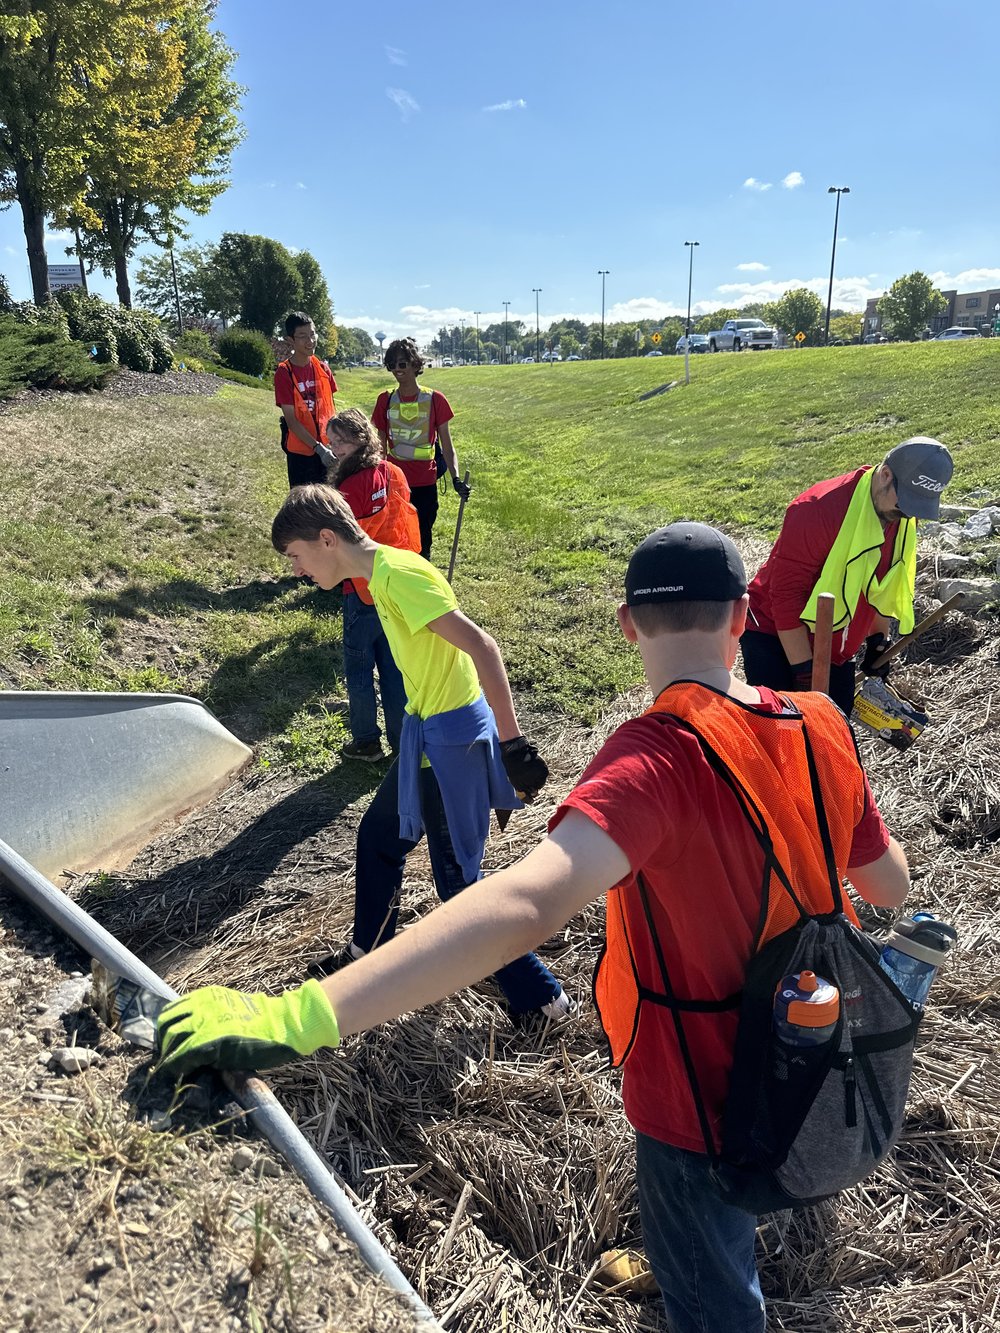 Team members clean up Wisconsin roads at the Adopt-a-Highway event.